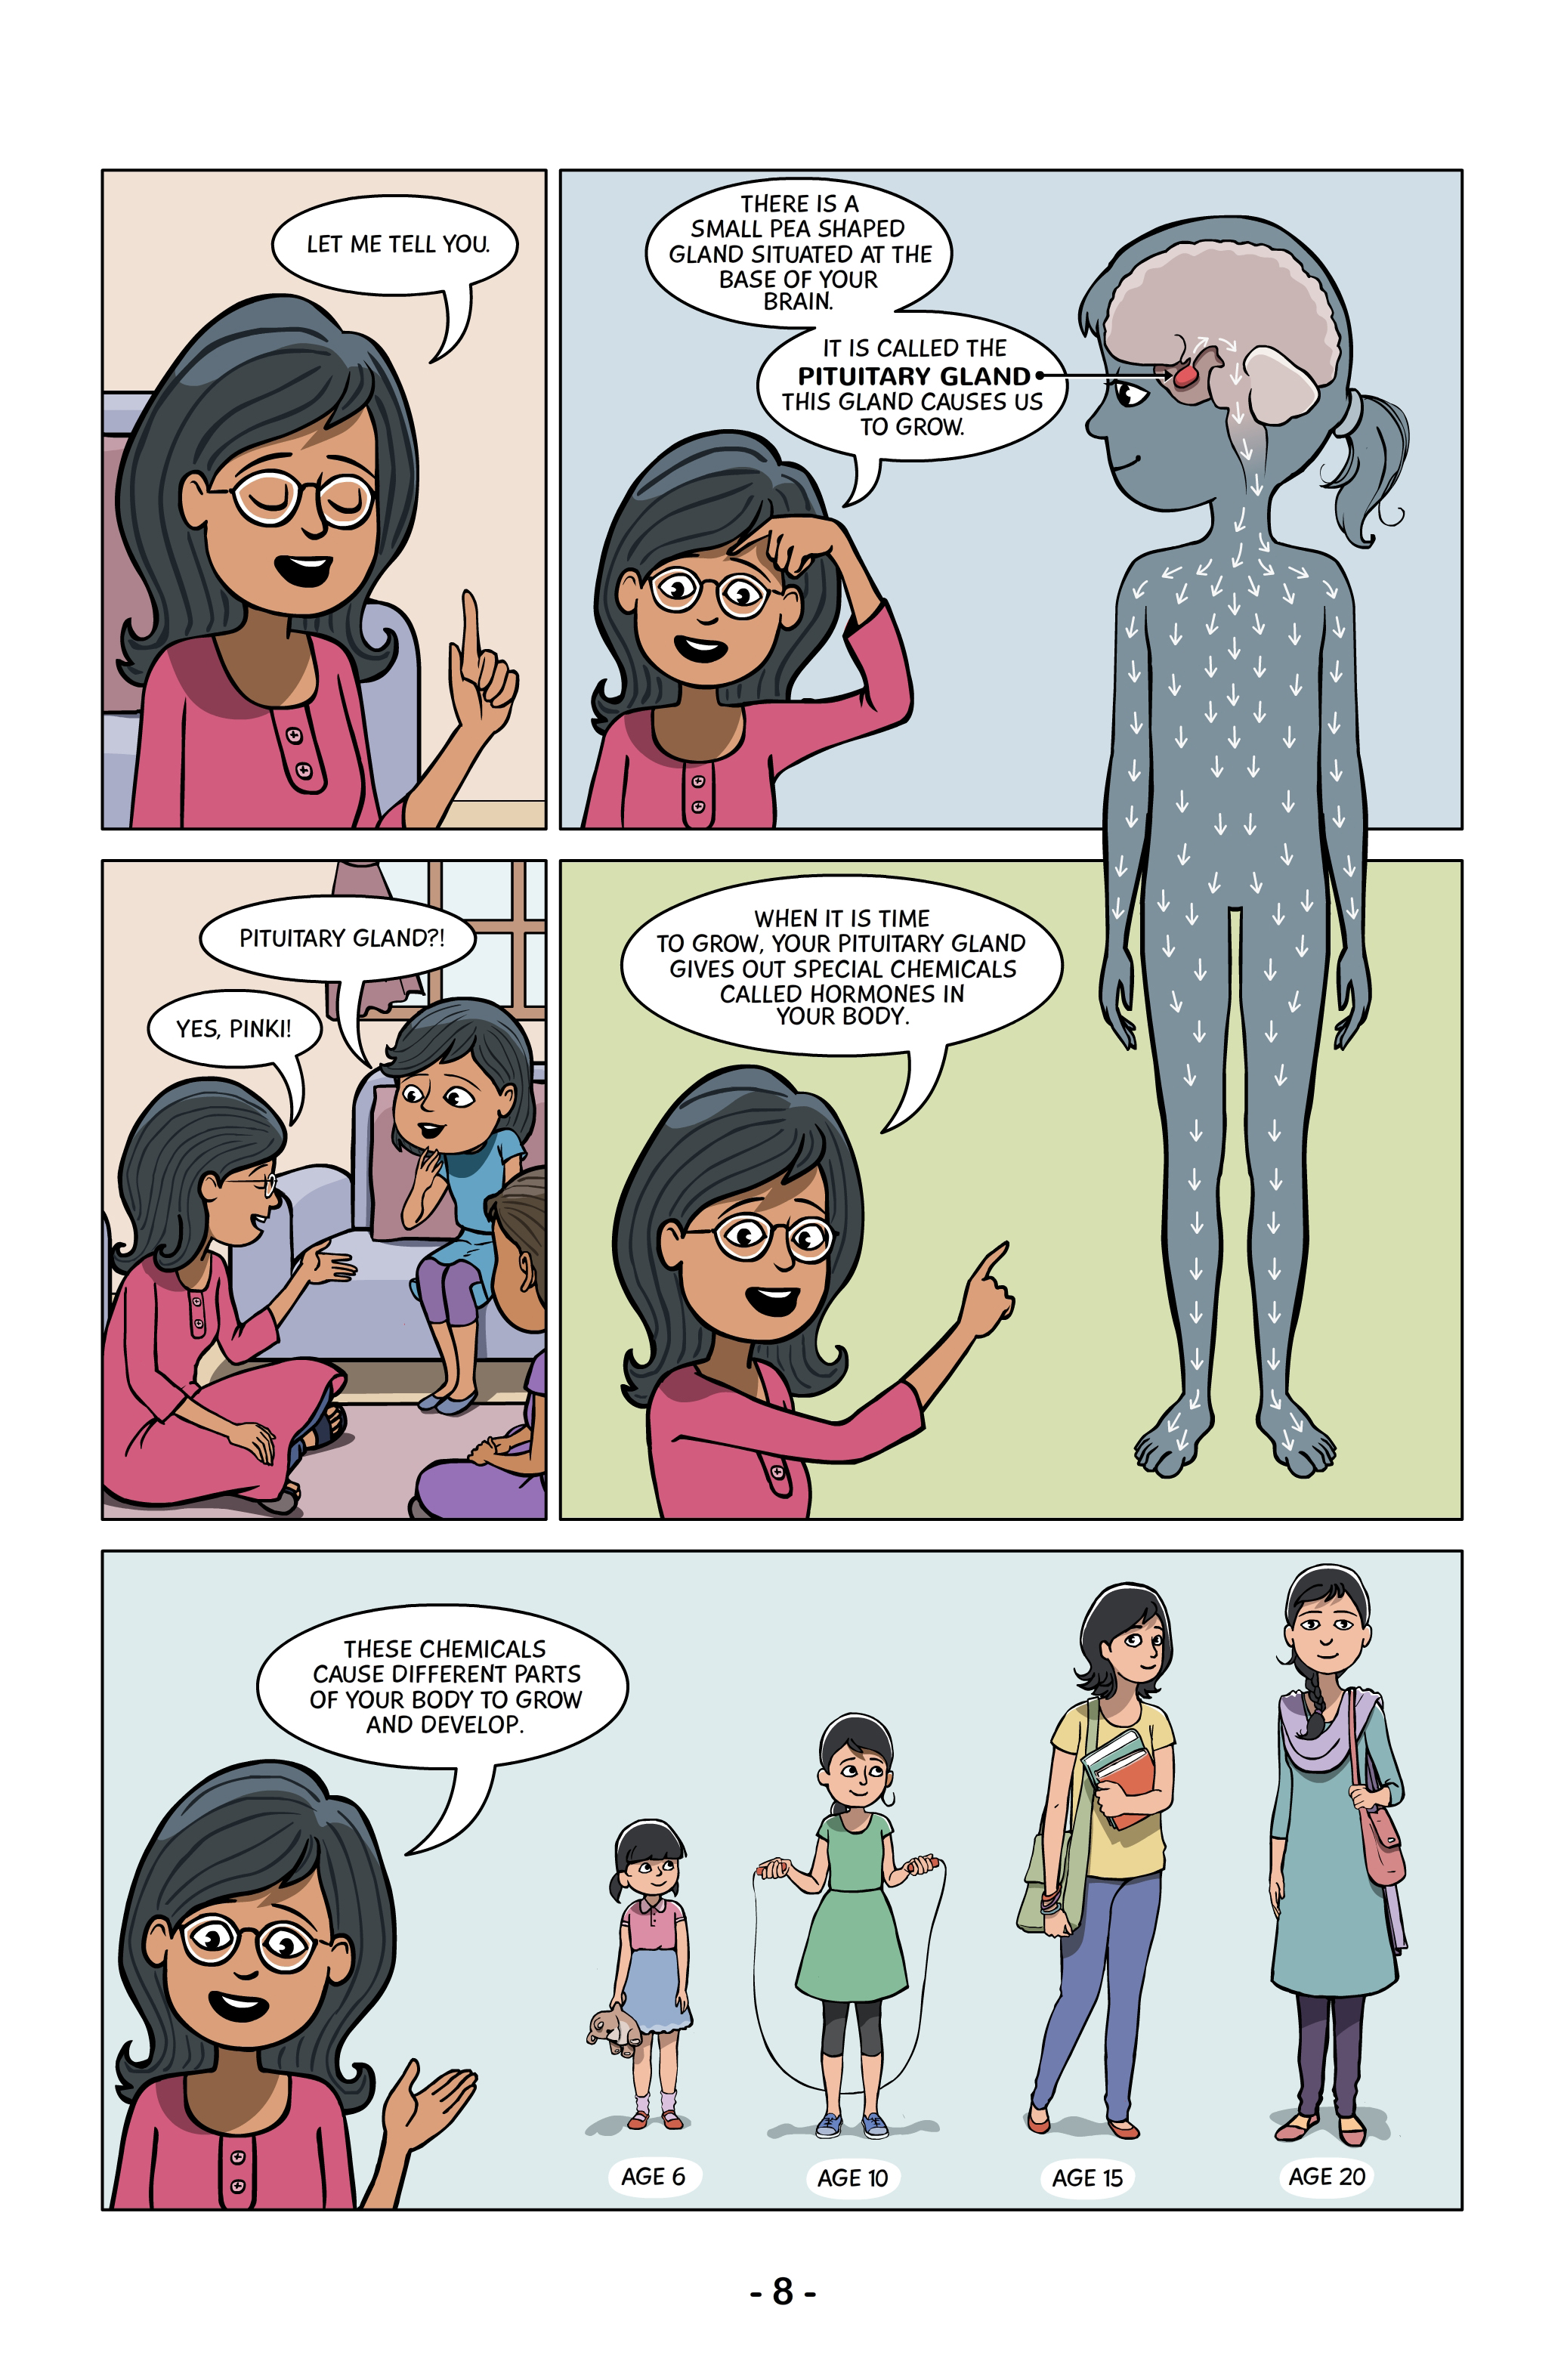 A page from Menstrupedia's publication, <em>Menstrupedia Comic</em>. The comic was launched in September 2014 after a successful crowdfunding campaign. (Menstrupedia)